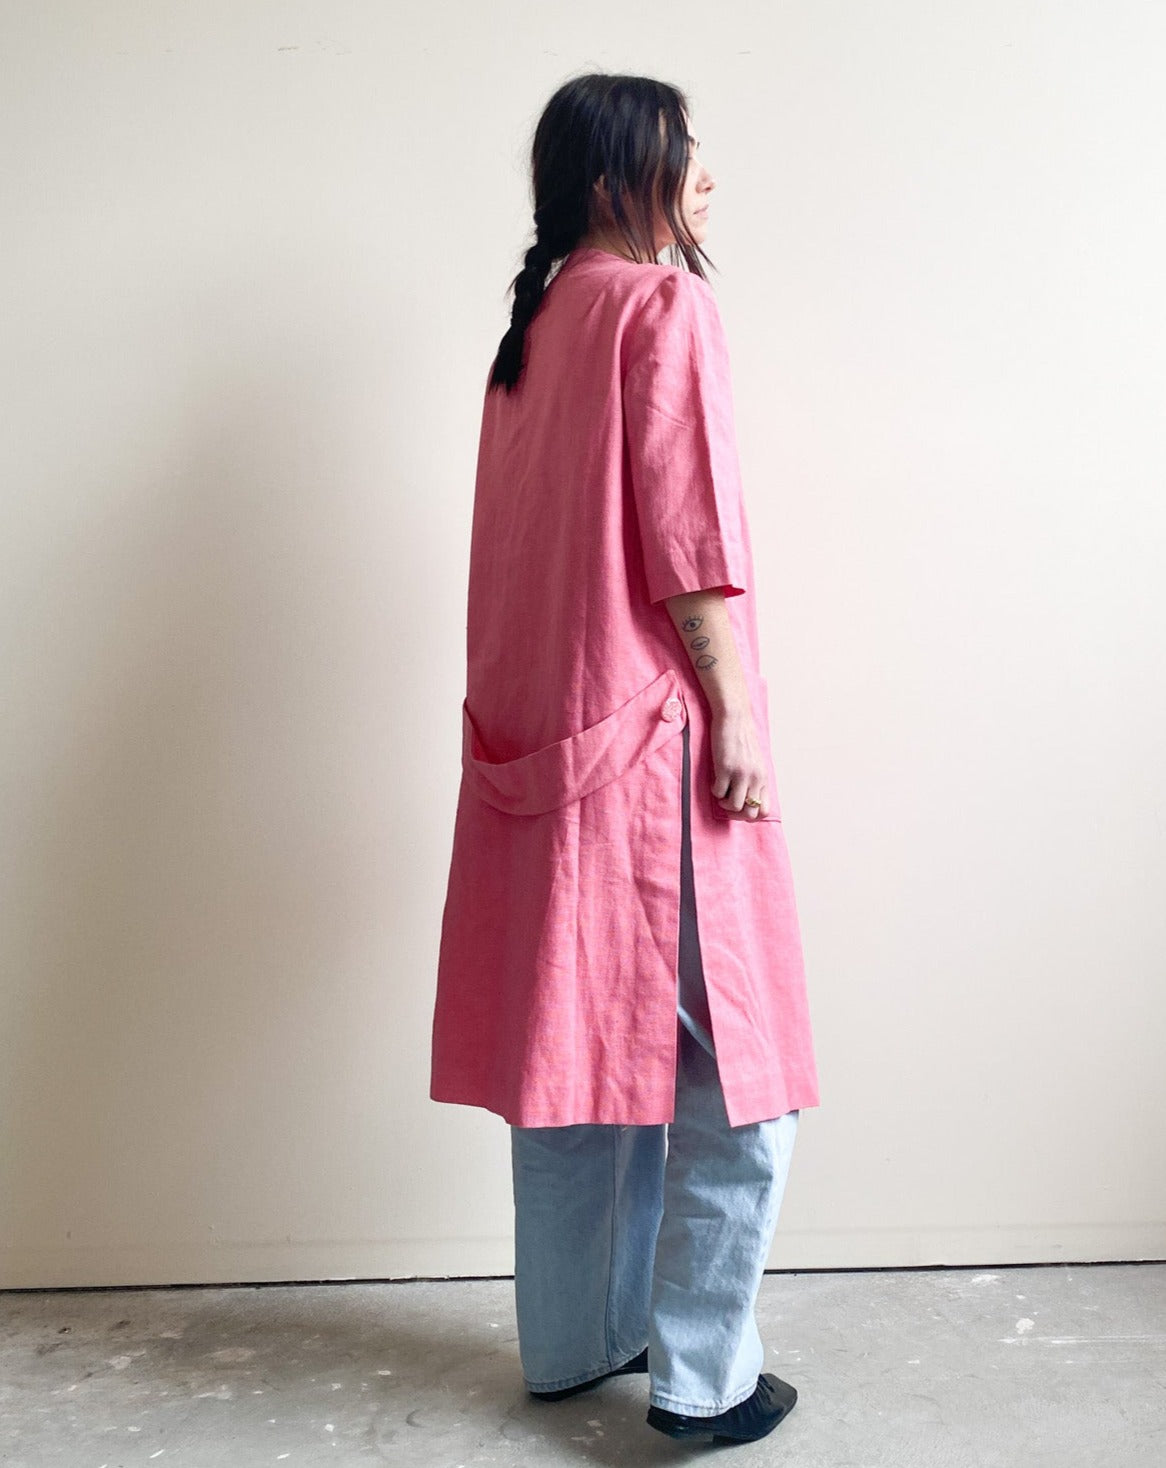 Vintage Pink Quarter Sleeve Coat with Glitter Buttons (L)